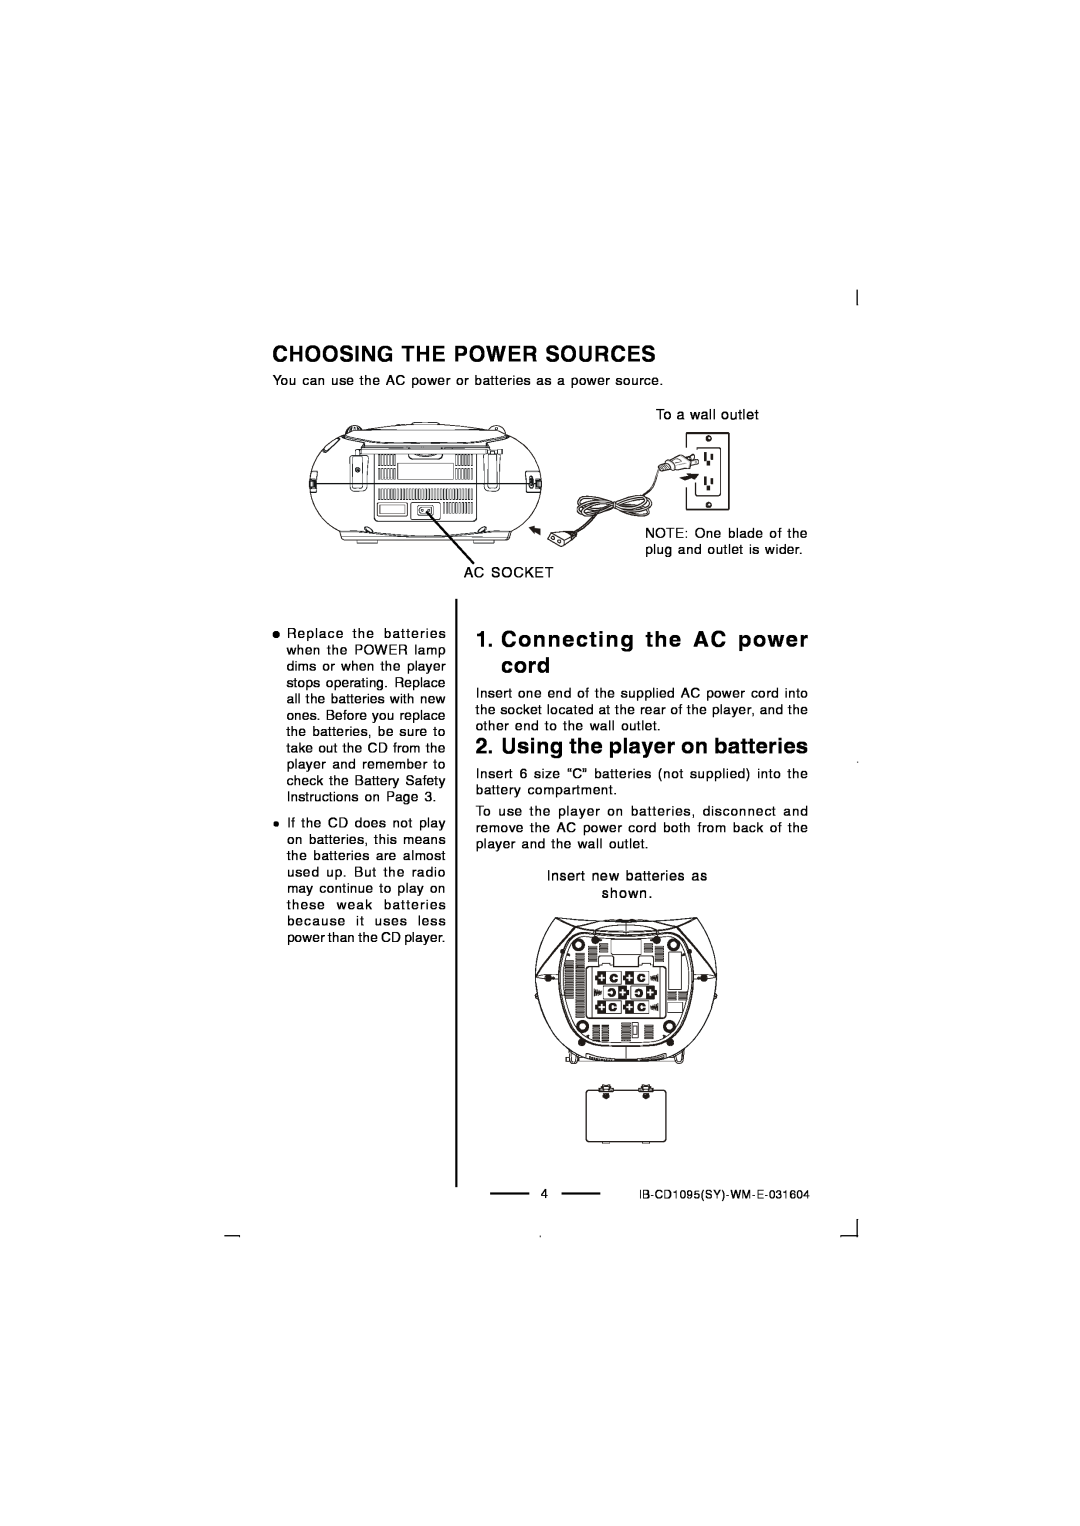 Lenoxx Electronics CD-1095 manual Choosing The Power Sources, Connecting the AC power cord, Using the player on batteries 